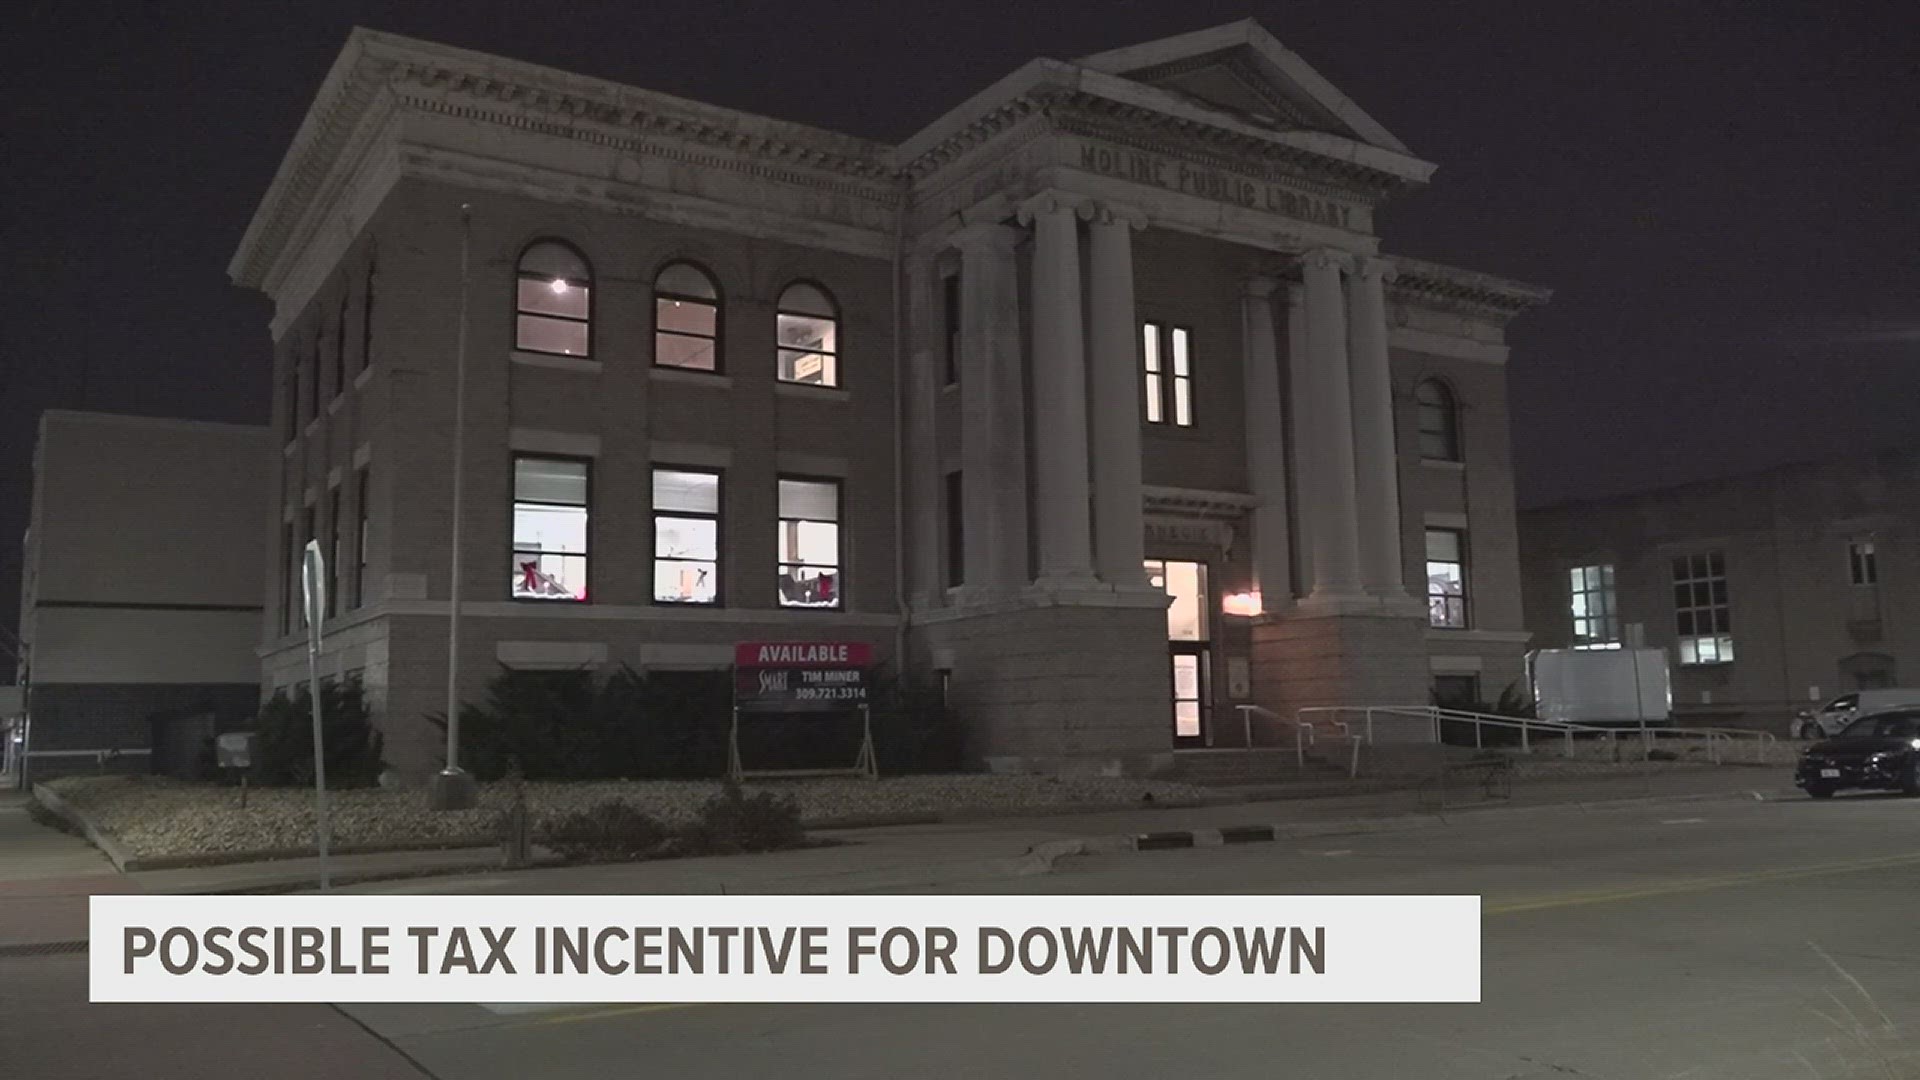 The TIF would be a small portion of 5th Avenue, across from the former Carnegie Library.